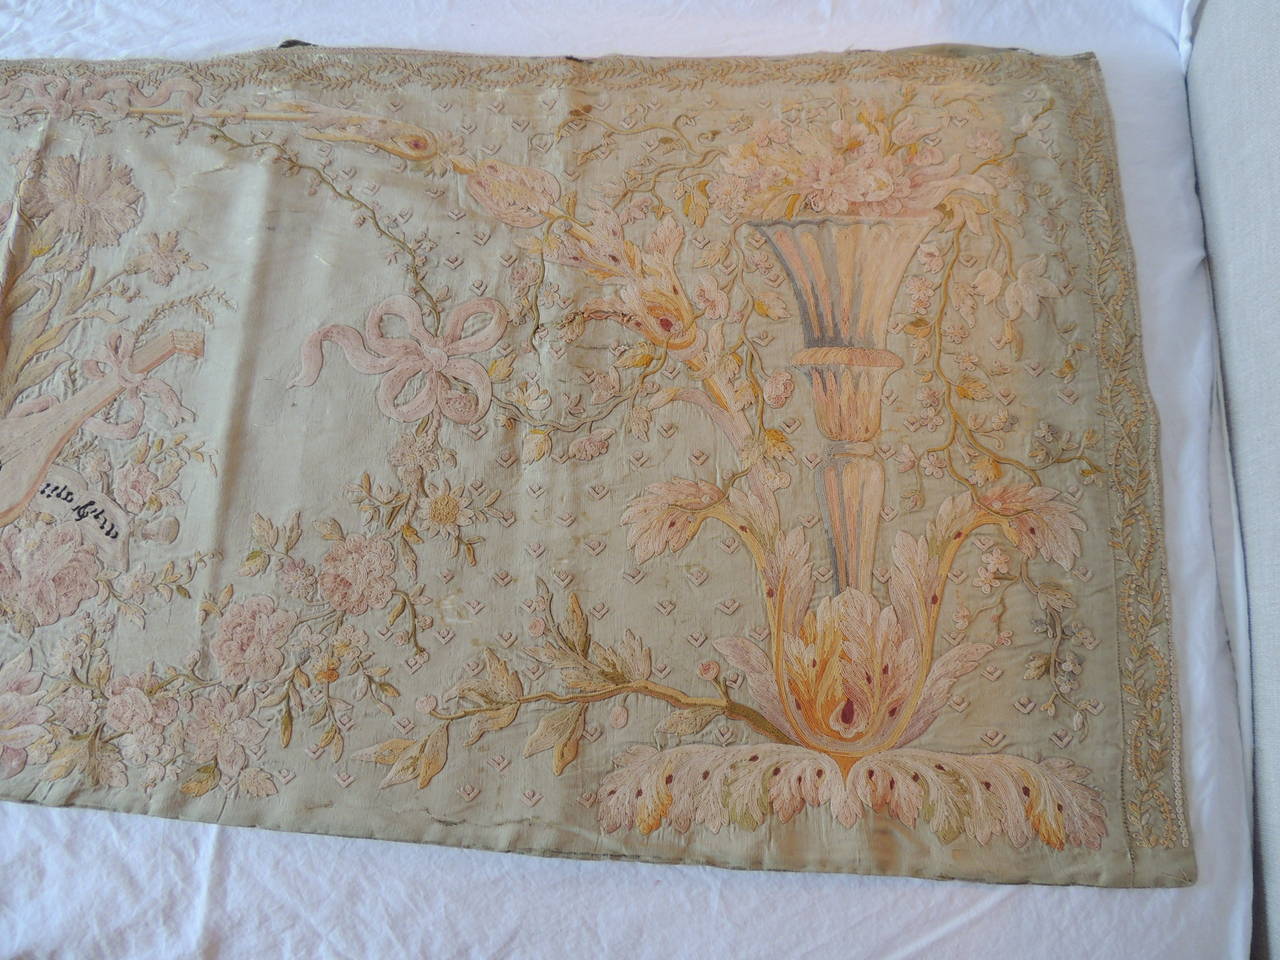 Embroidery panel depicting music instrument in the centre medallion and blooming flowers all-around. Silk and linen on silk background textile. Soft shades of green, yellows, pink and brown. Ideal to frame or to use on a table or on a sofa